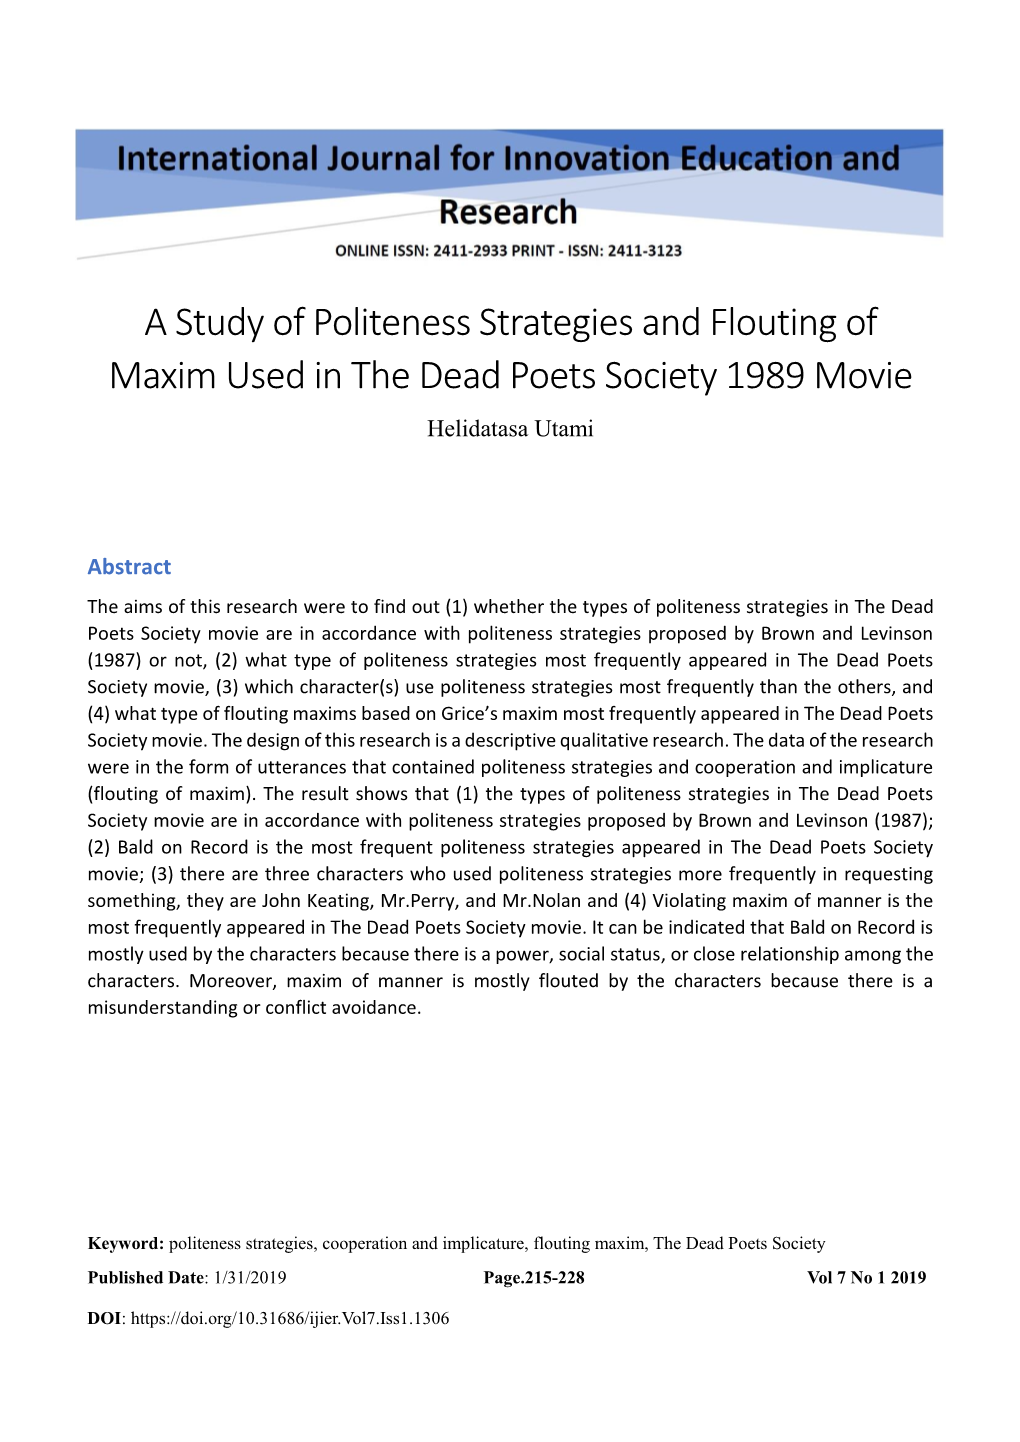 A Study of Politeness Strategies and Flouting of Maxim Used in the Dead Poets Society 1989 Movie